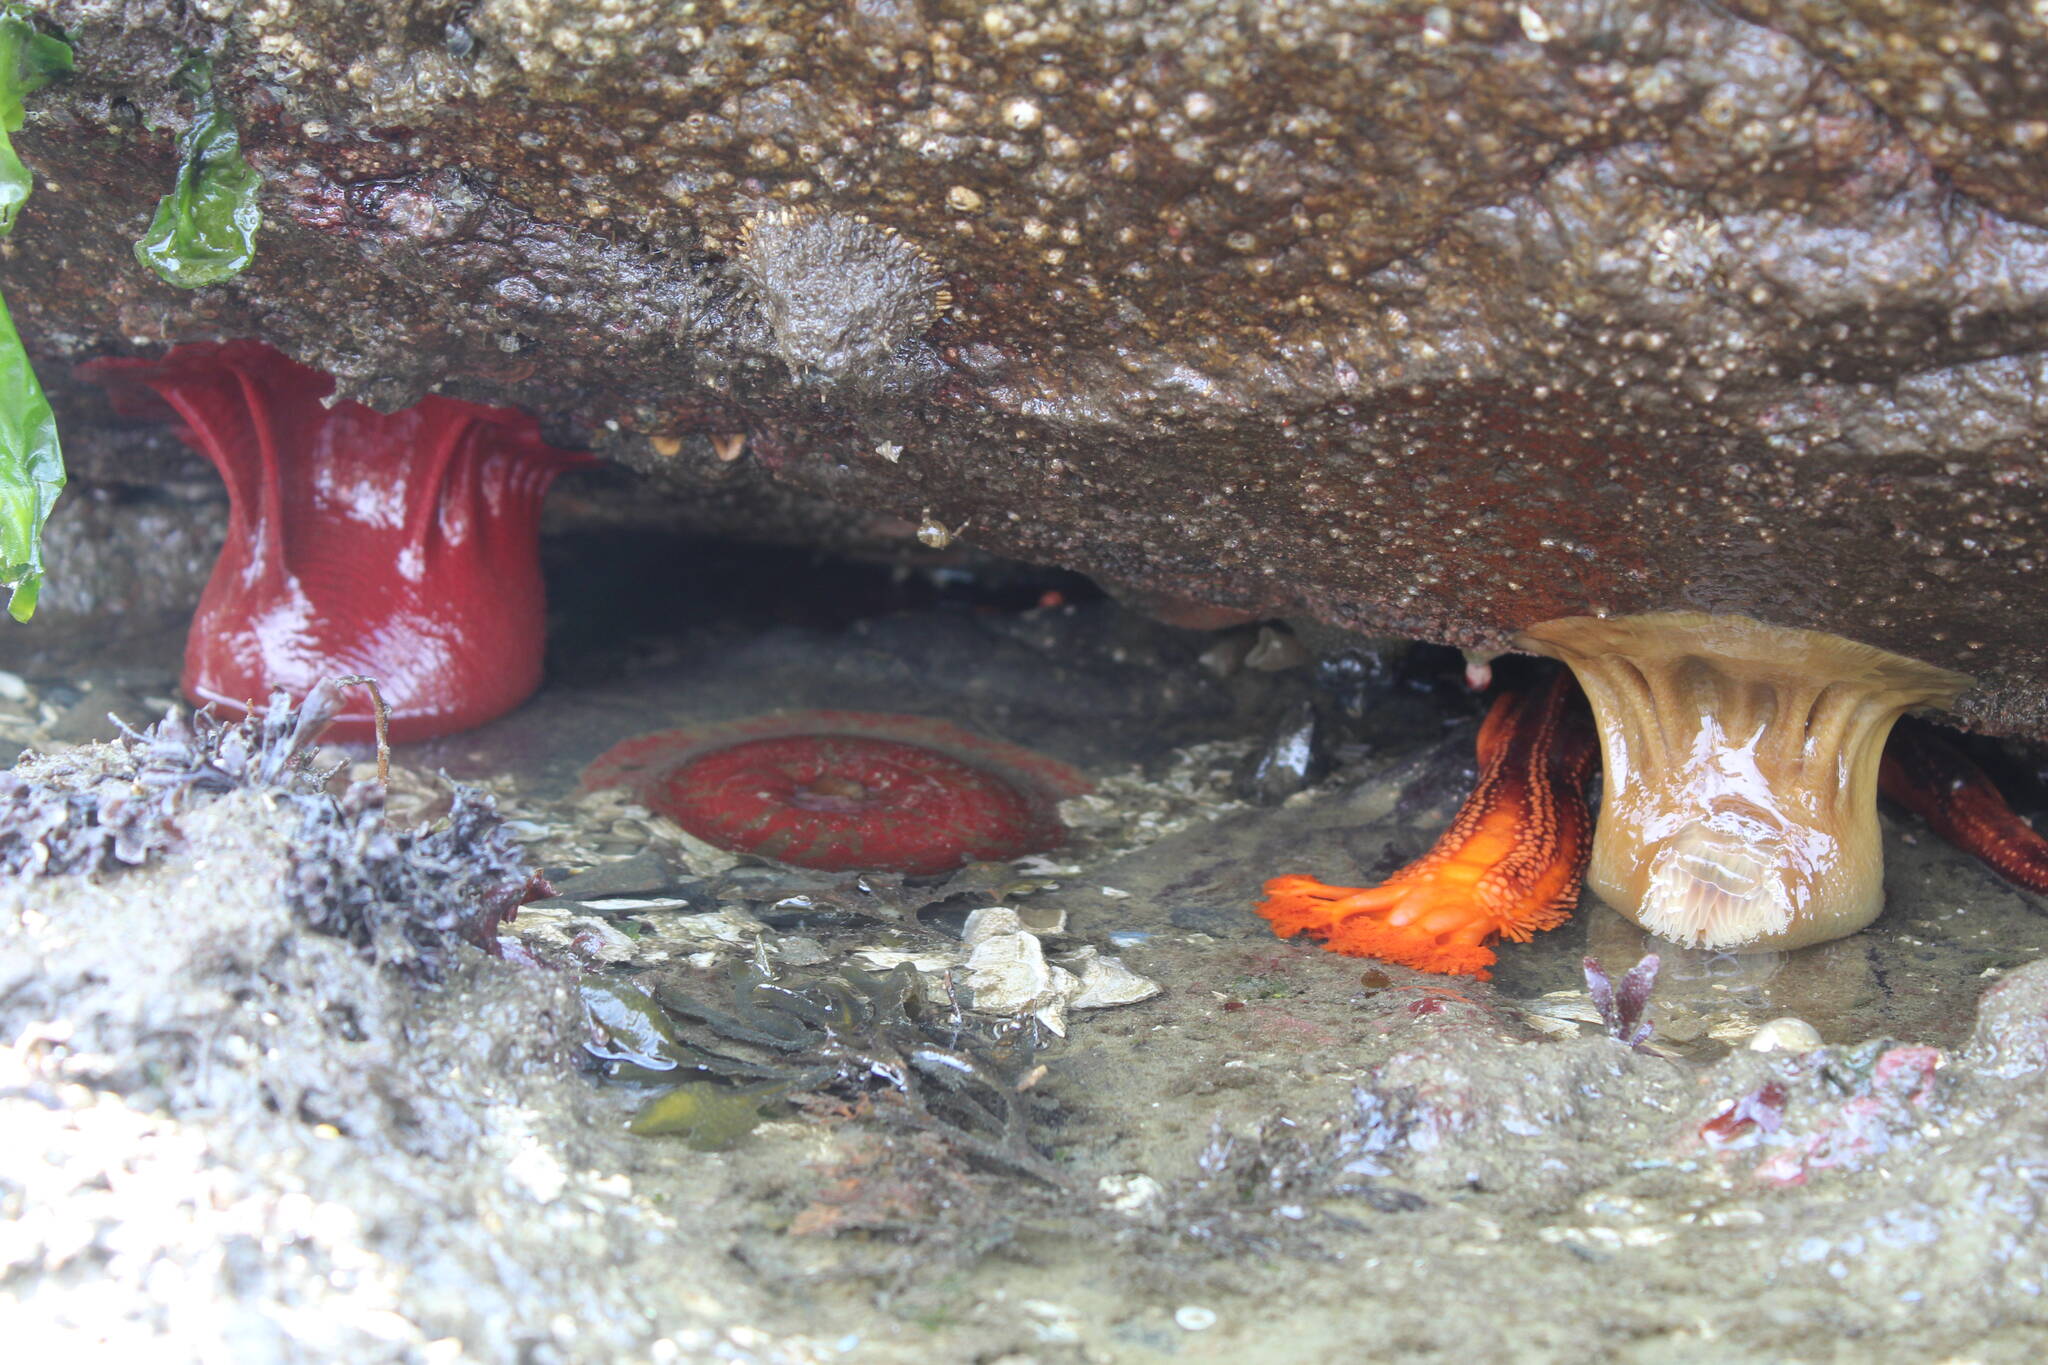 Ultra low tides Thursday exposed a fascinating array of critters in tidal pools on Rosario beach, including these sea cucumbers and anenome. (Photo by Karina Andrew/Whidbey News-Times)